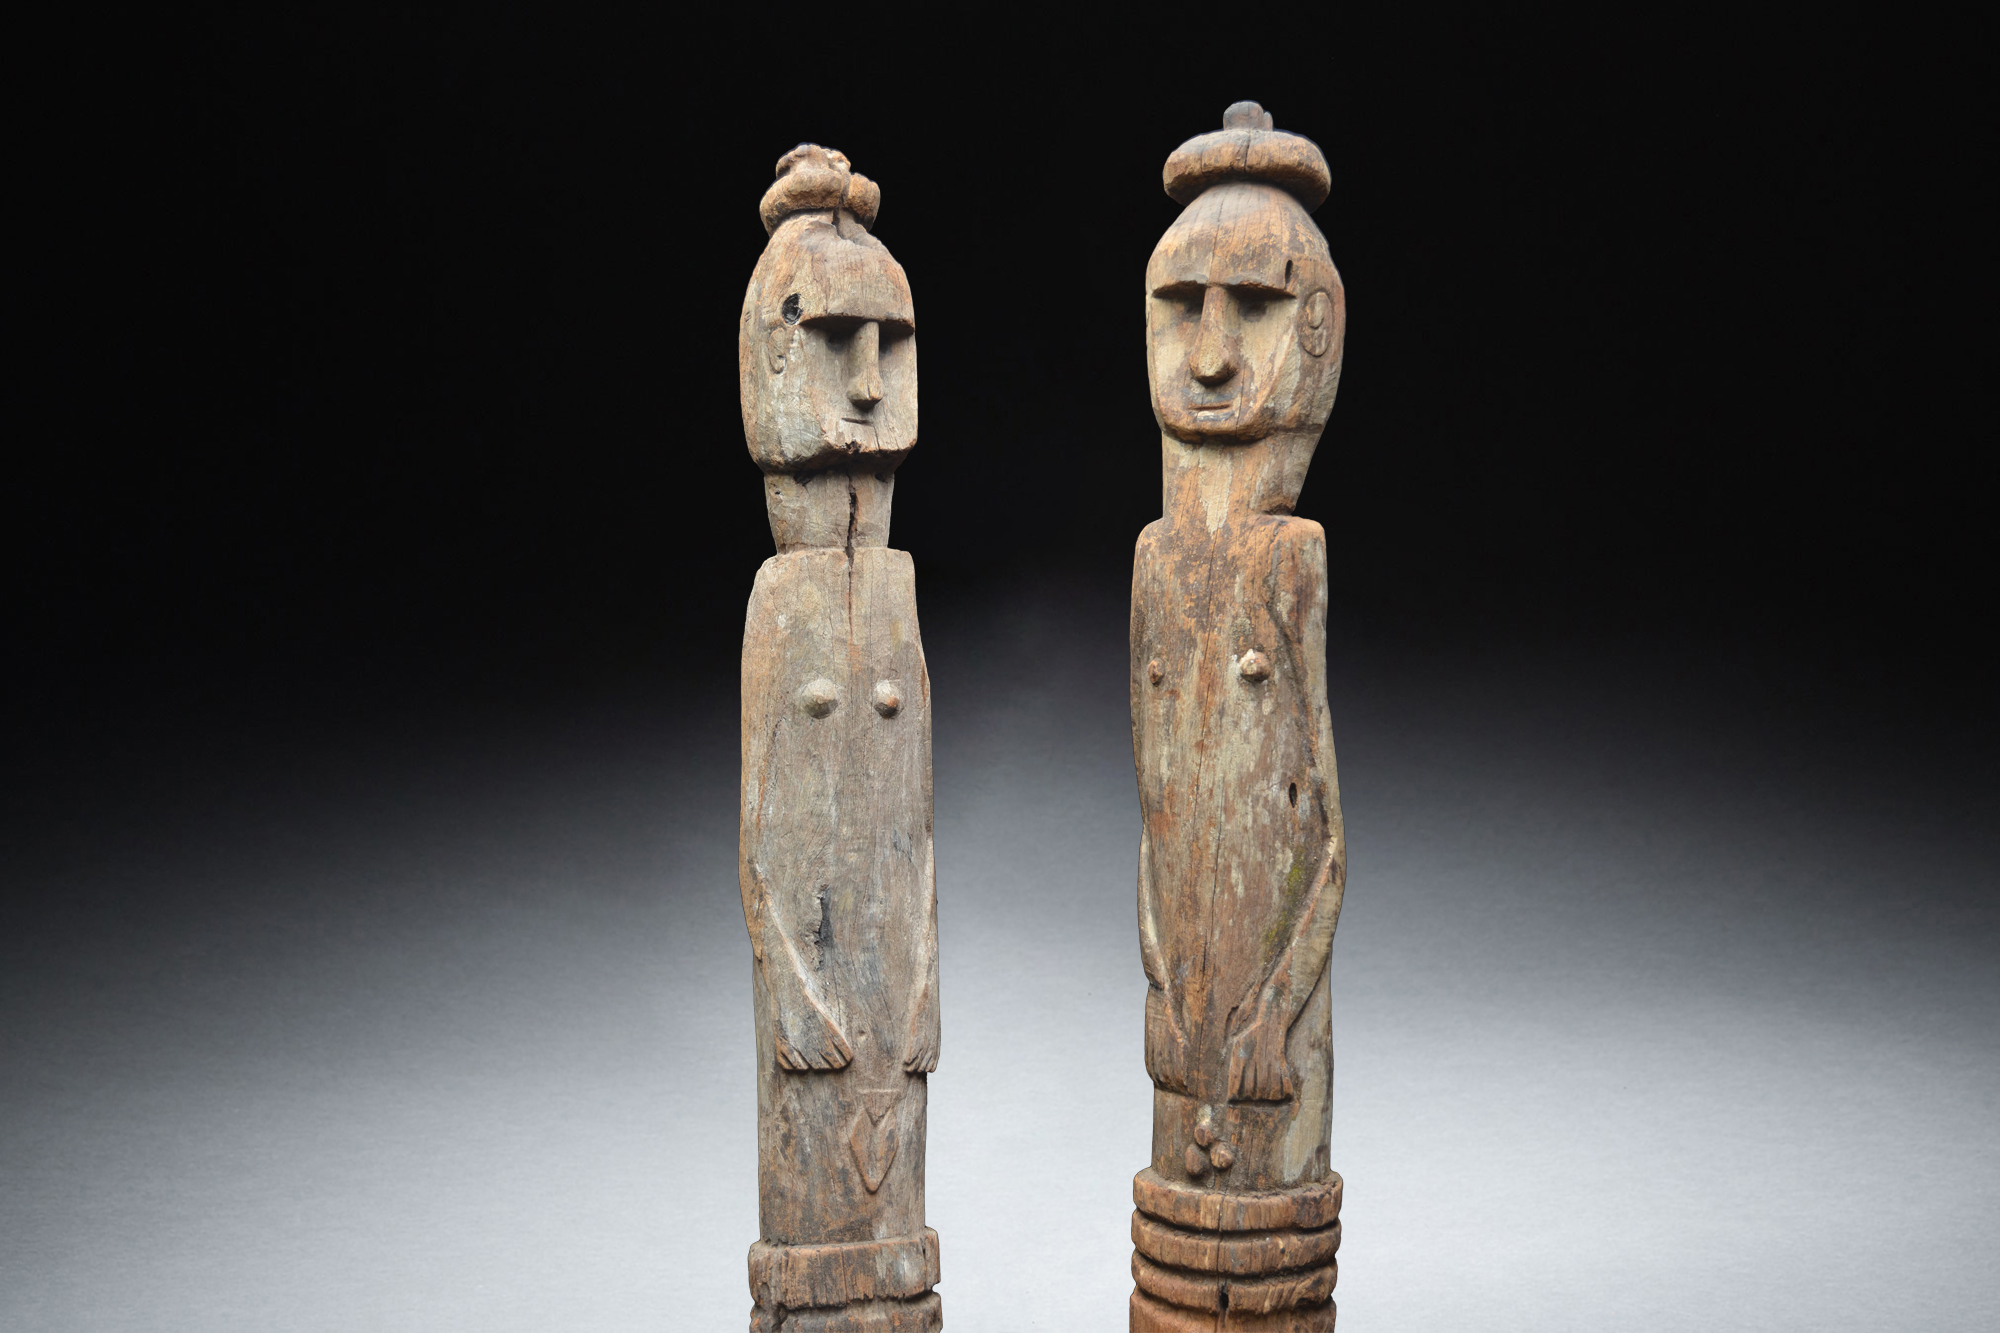 A Fine Old Pair of Ancestor Figures from Aitos Area East Timor